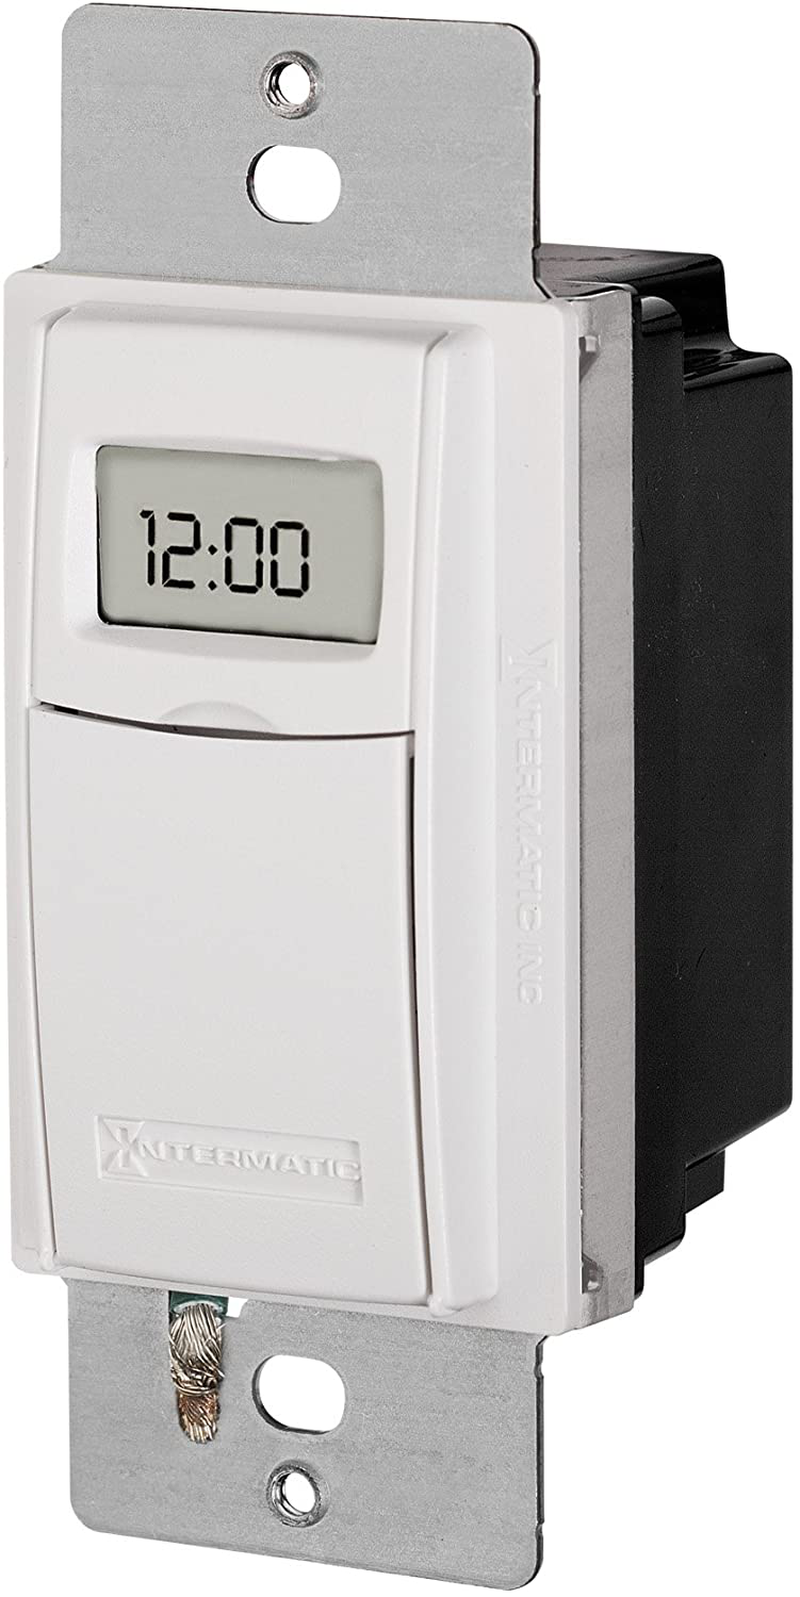 Intermatic ST01 7 Day Programmable In Wall Digital Timer Switch for Lights and Appliances, Astronomic, Self Adjusting, Heavy Duty,White Home & Garden > Lighting Accessories > Lighting Timers Intermatic Default Title  